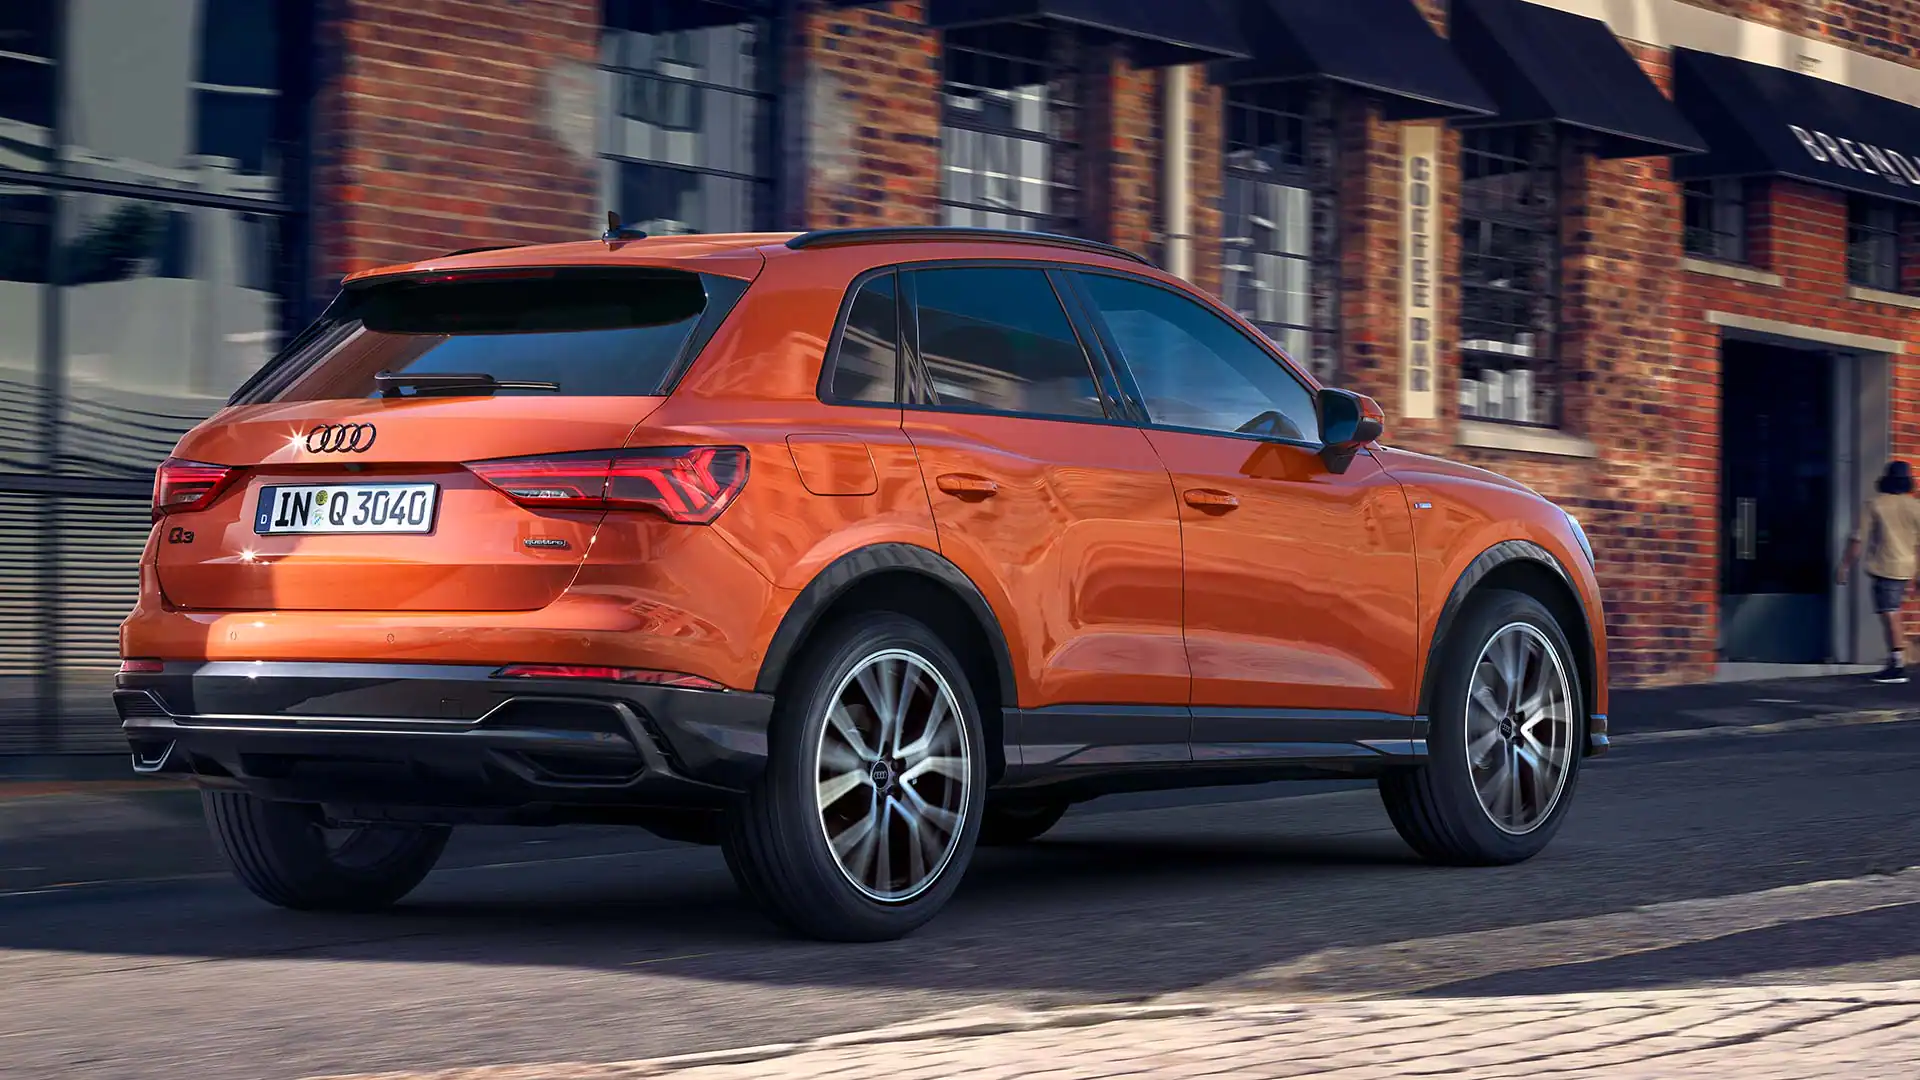 exterior rear side view of an orange audi q3 rear driving down a city road